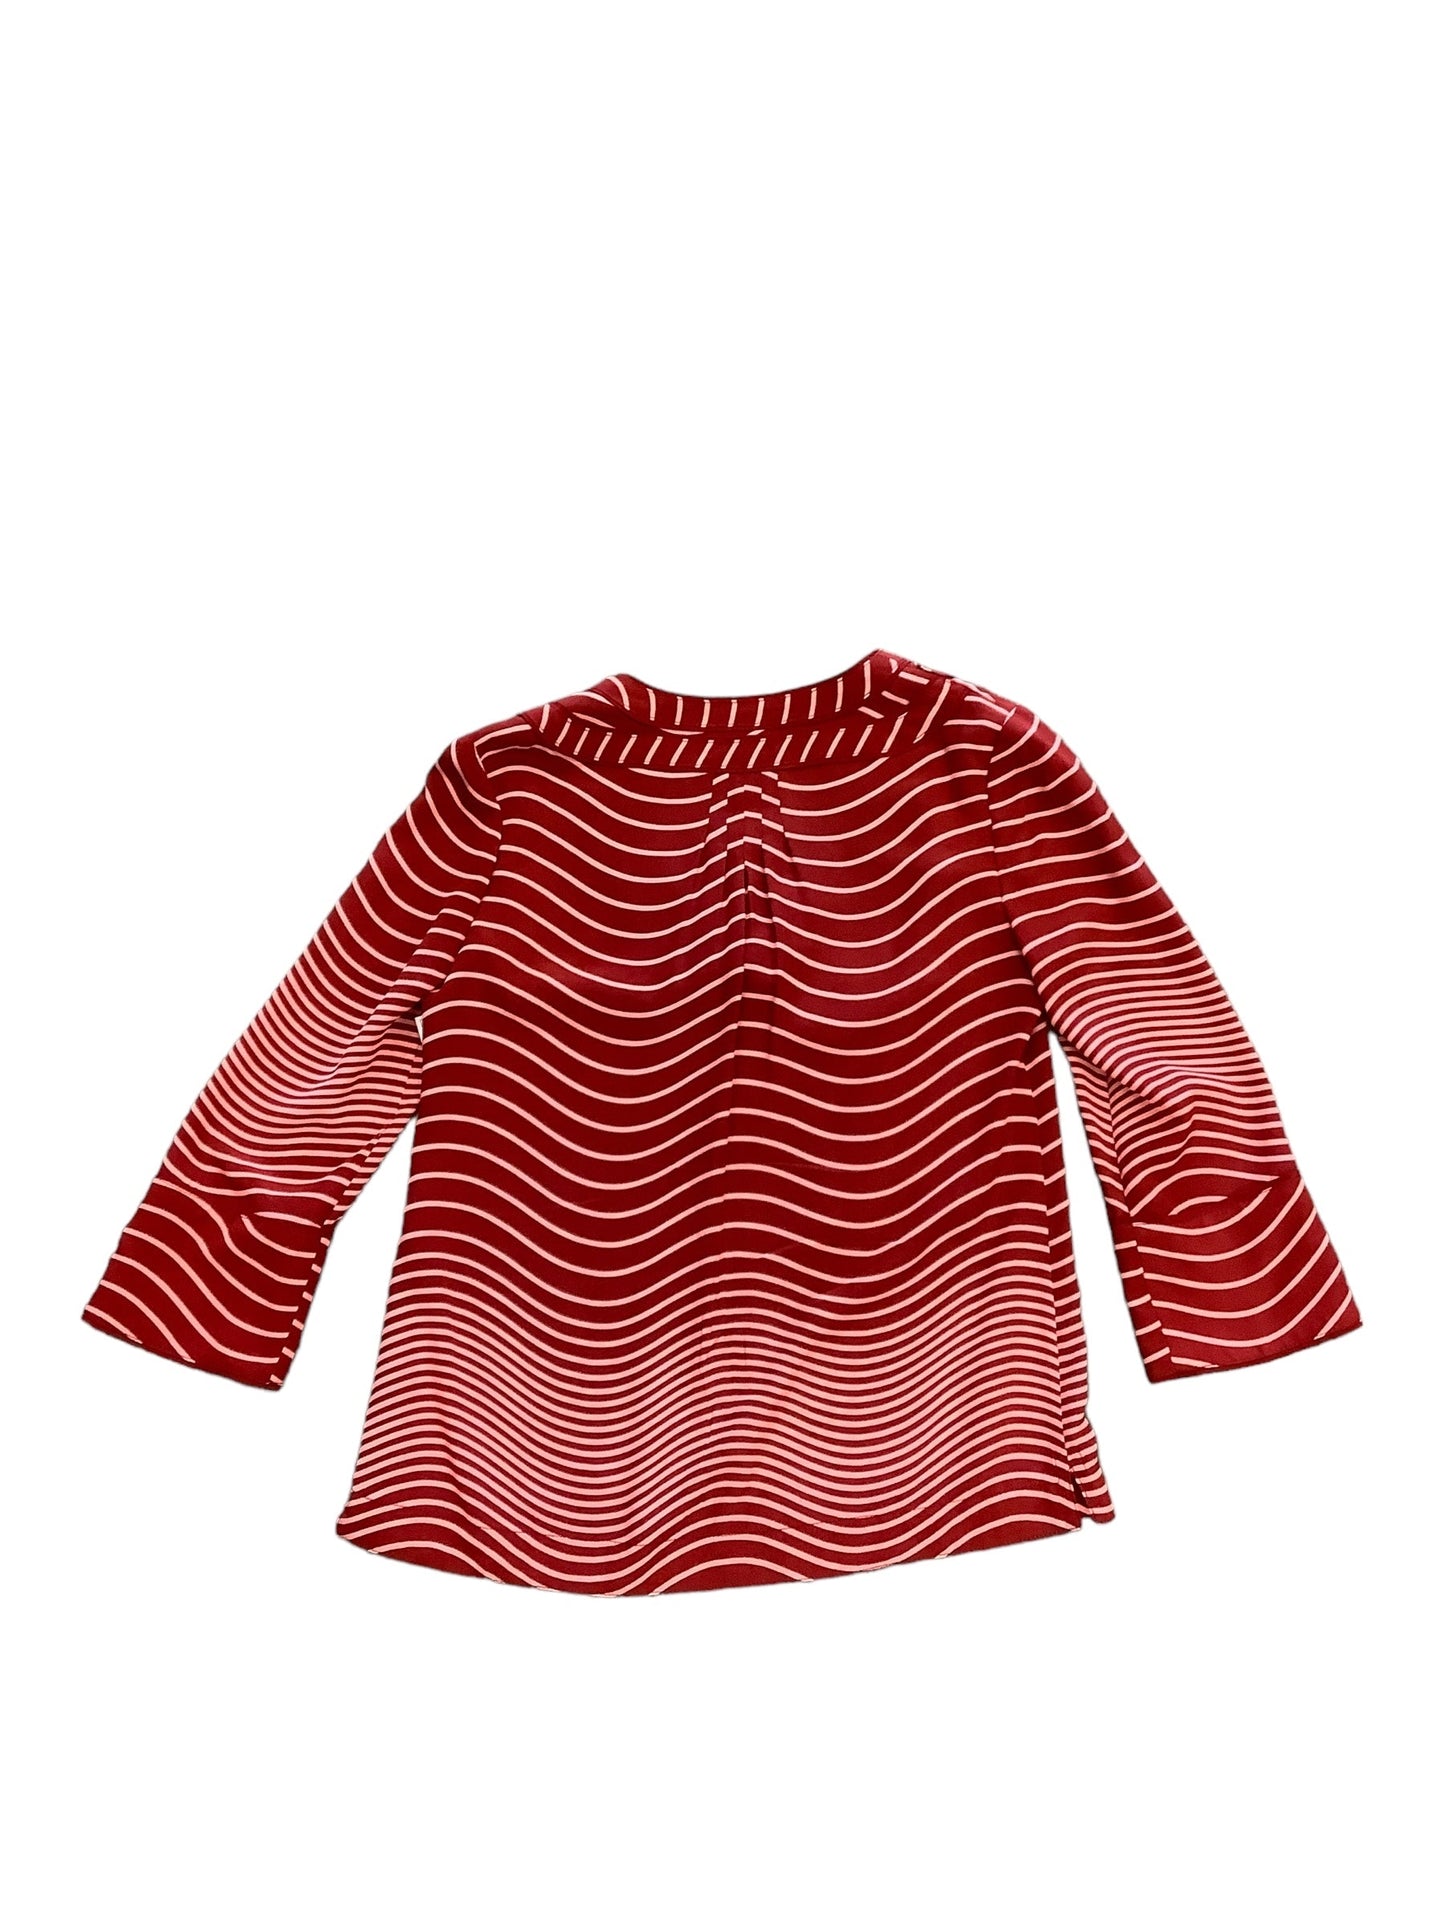 Red Top Long Sleeve Tory Burch, Size 4